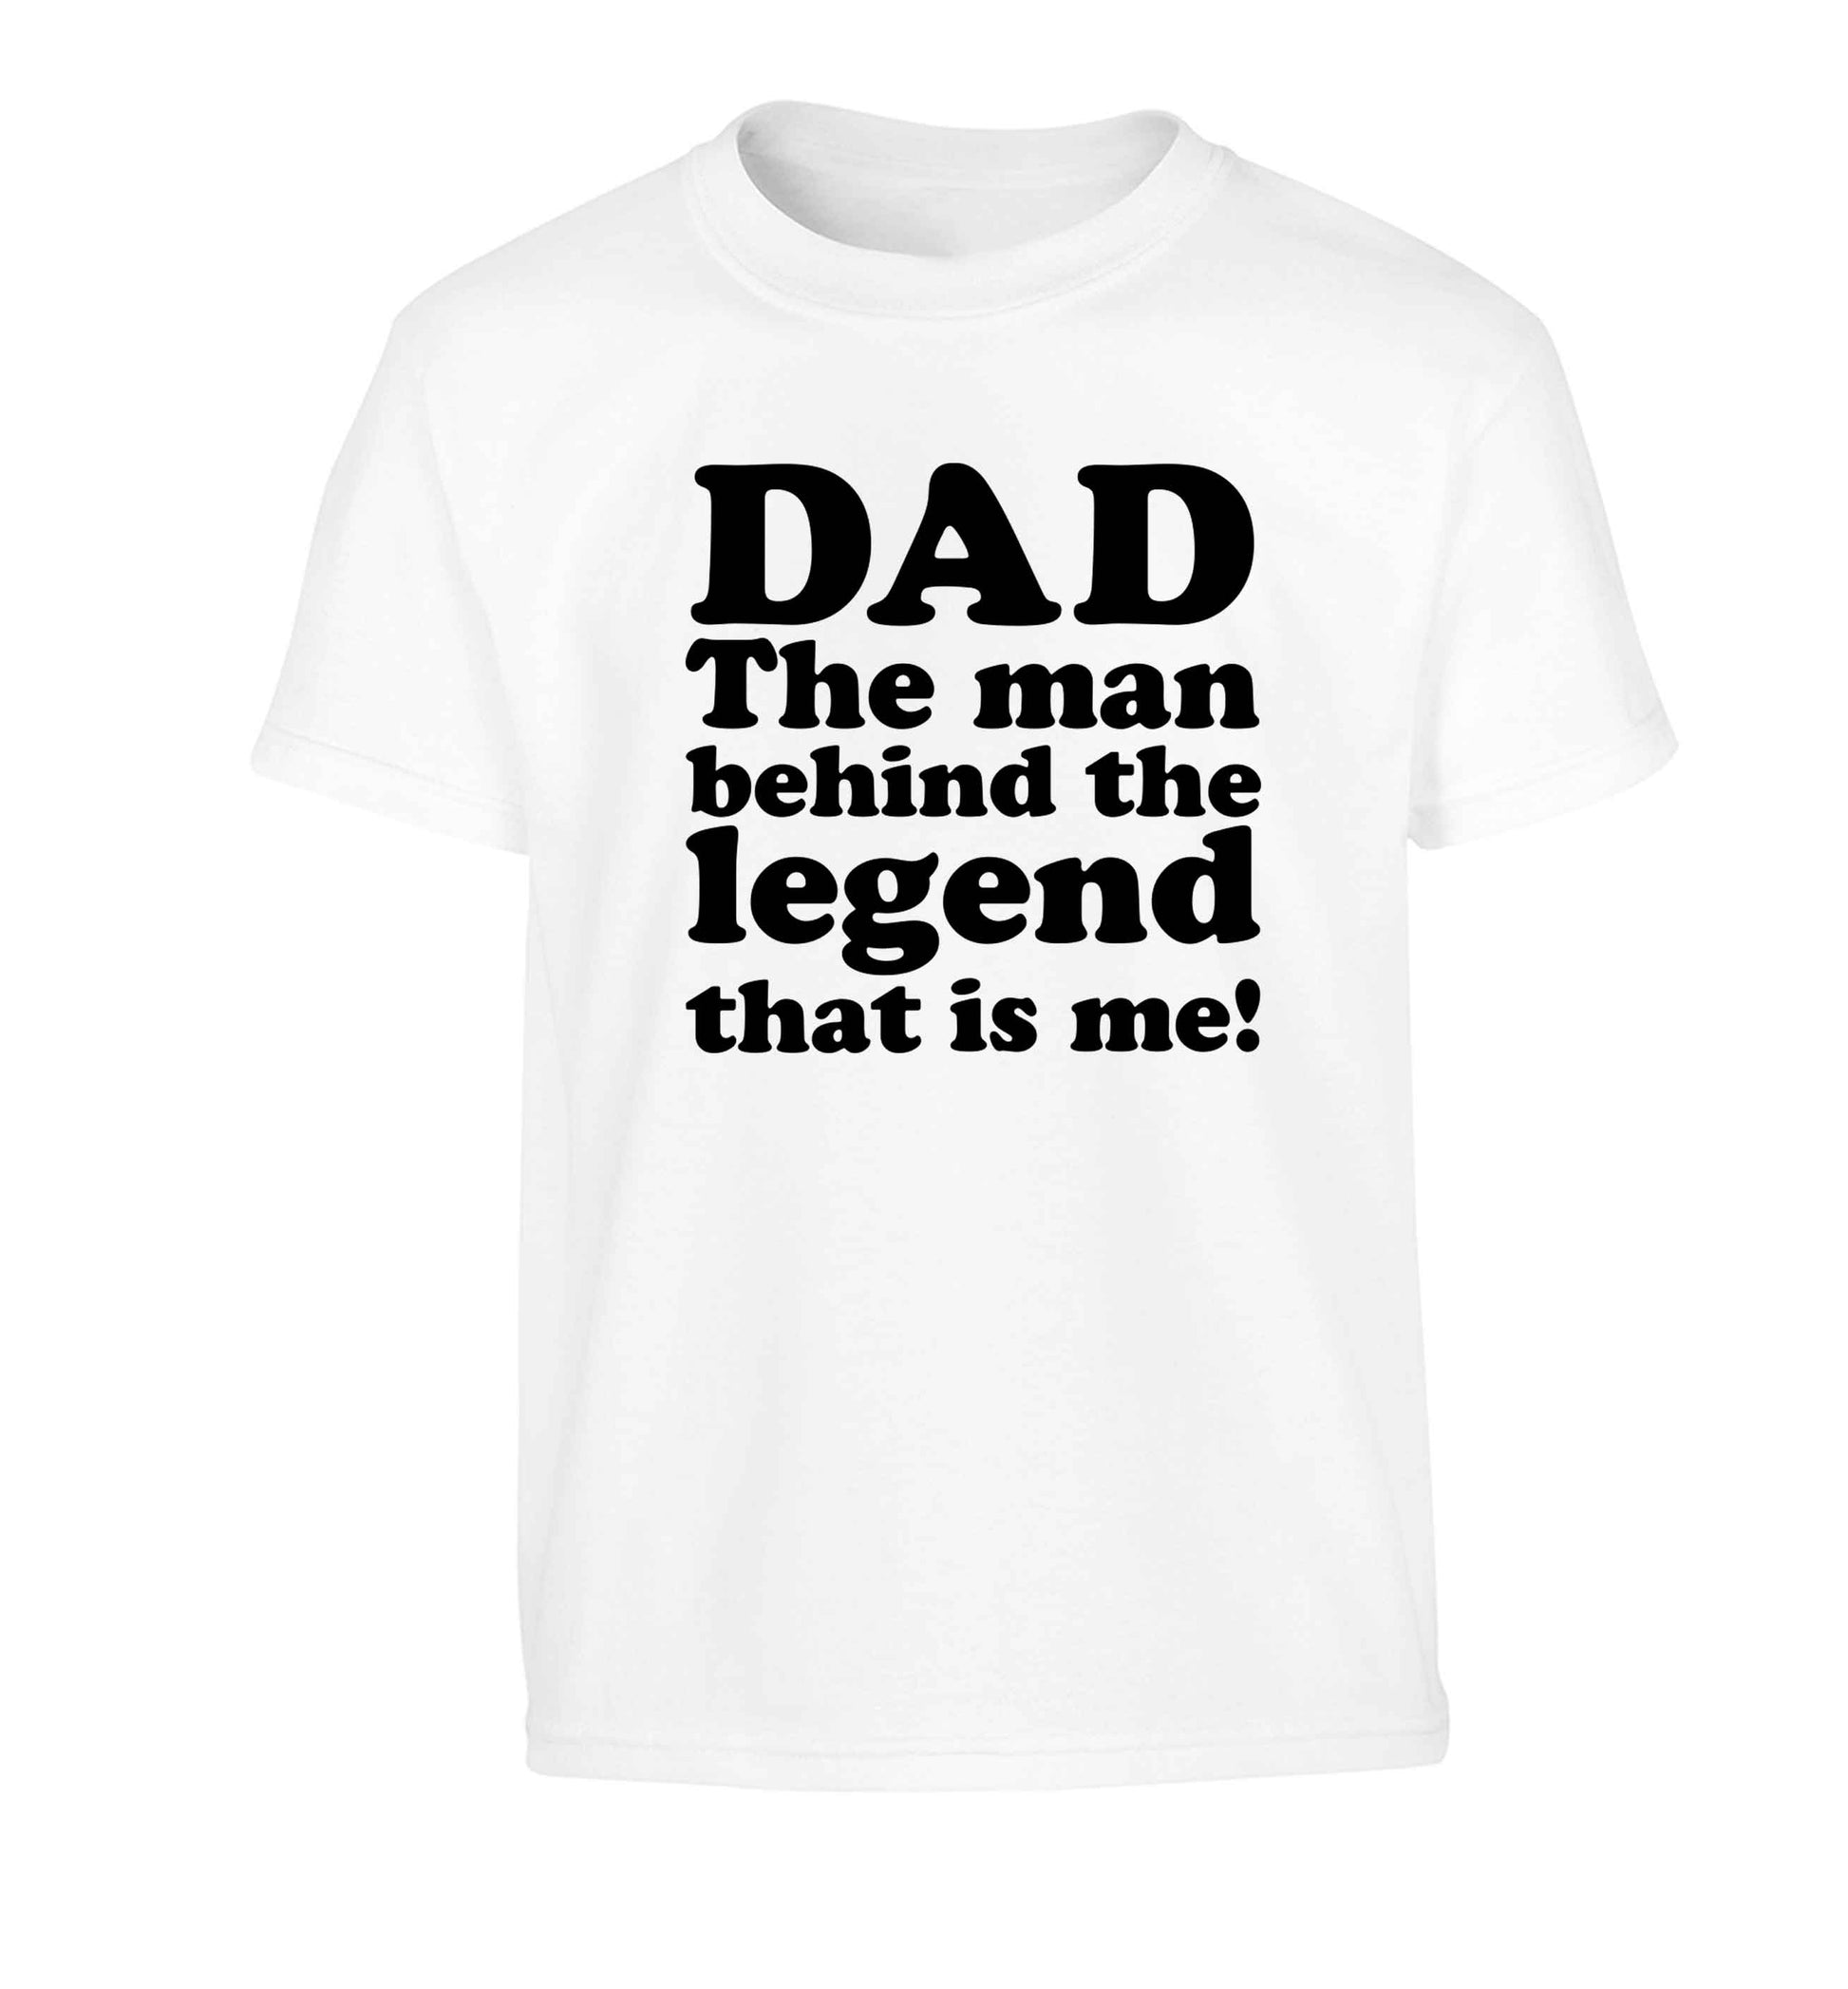 Dad the man behind the legend that is me Children's white Tshirt 12-13 Years